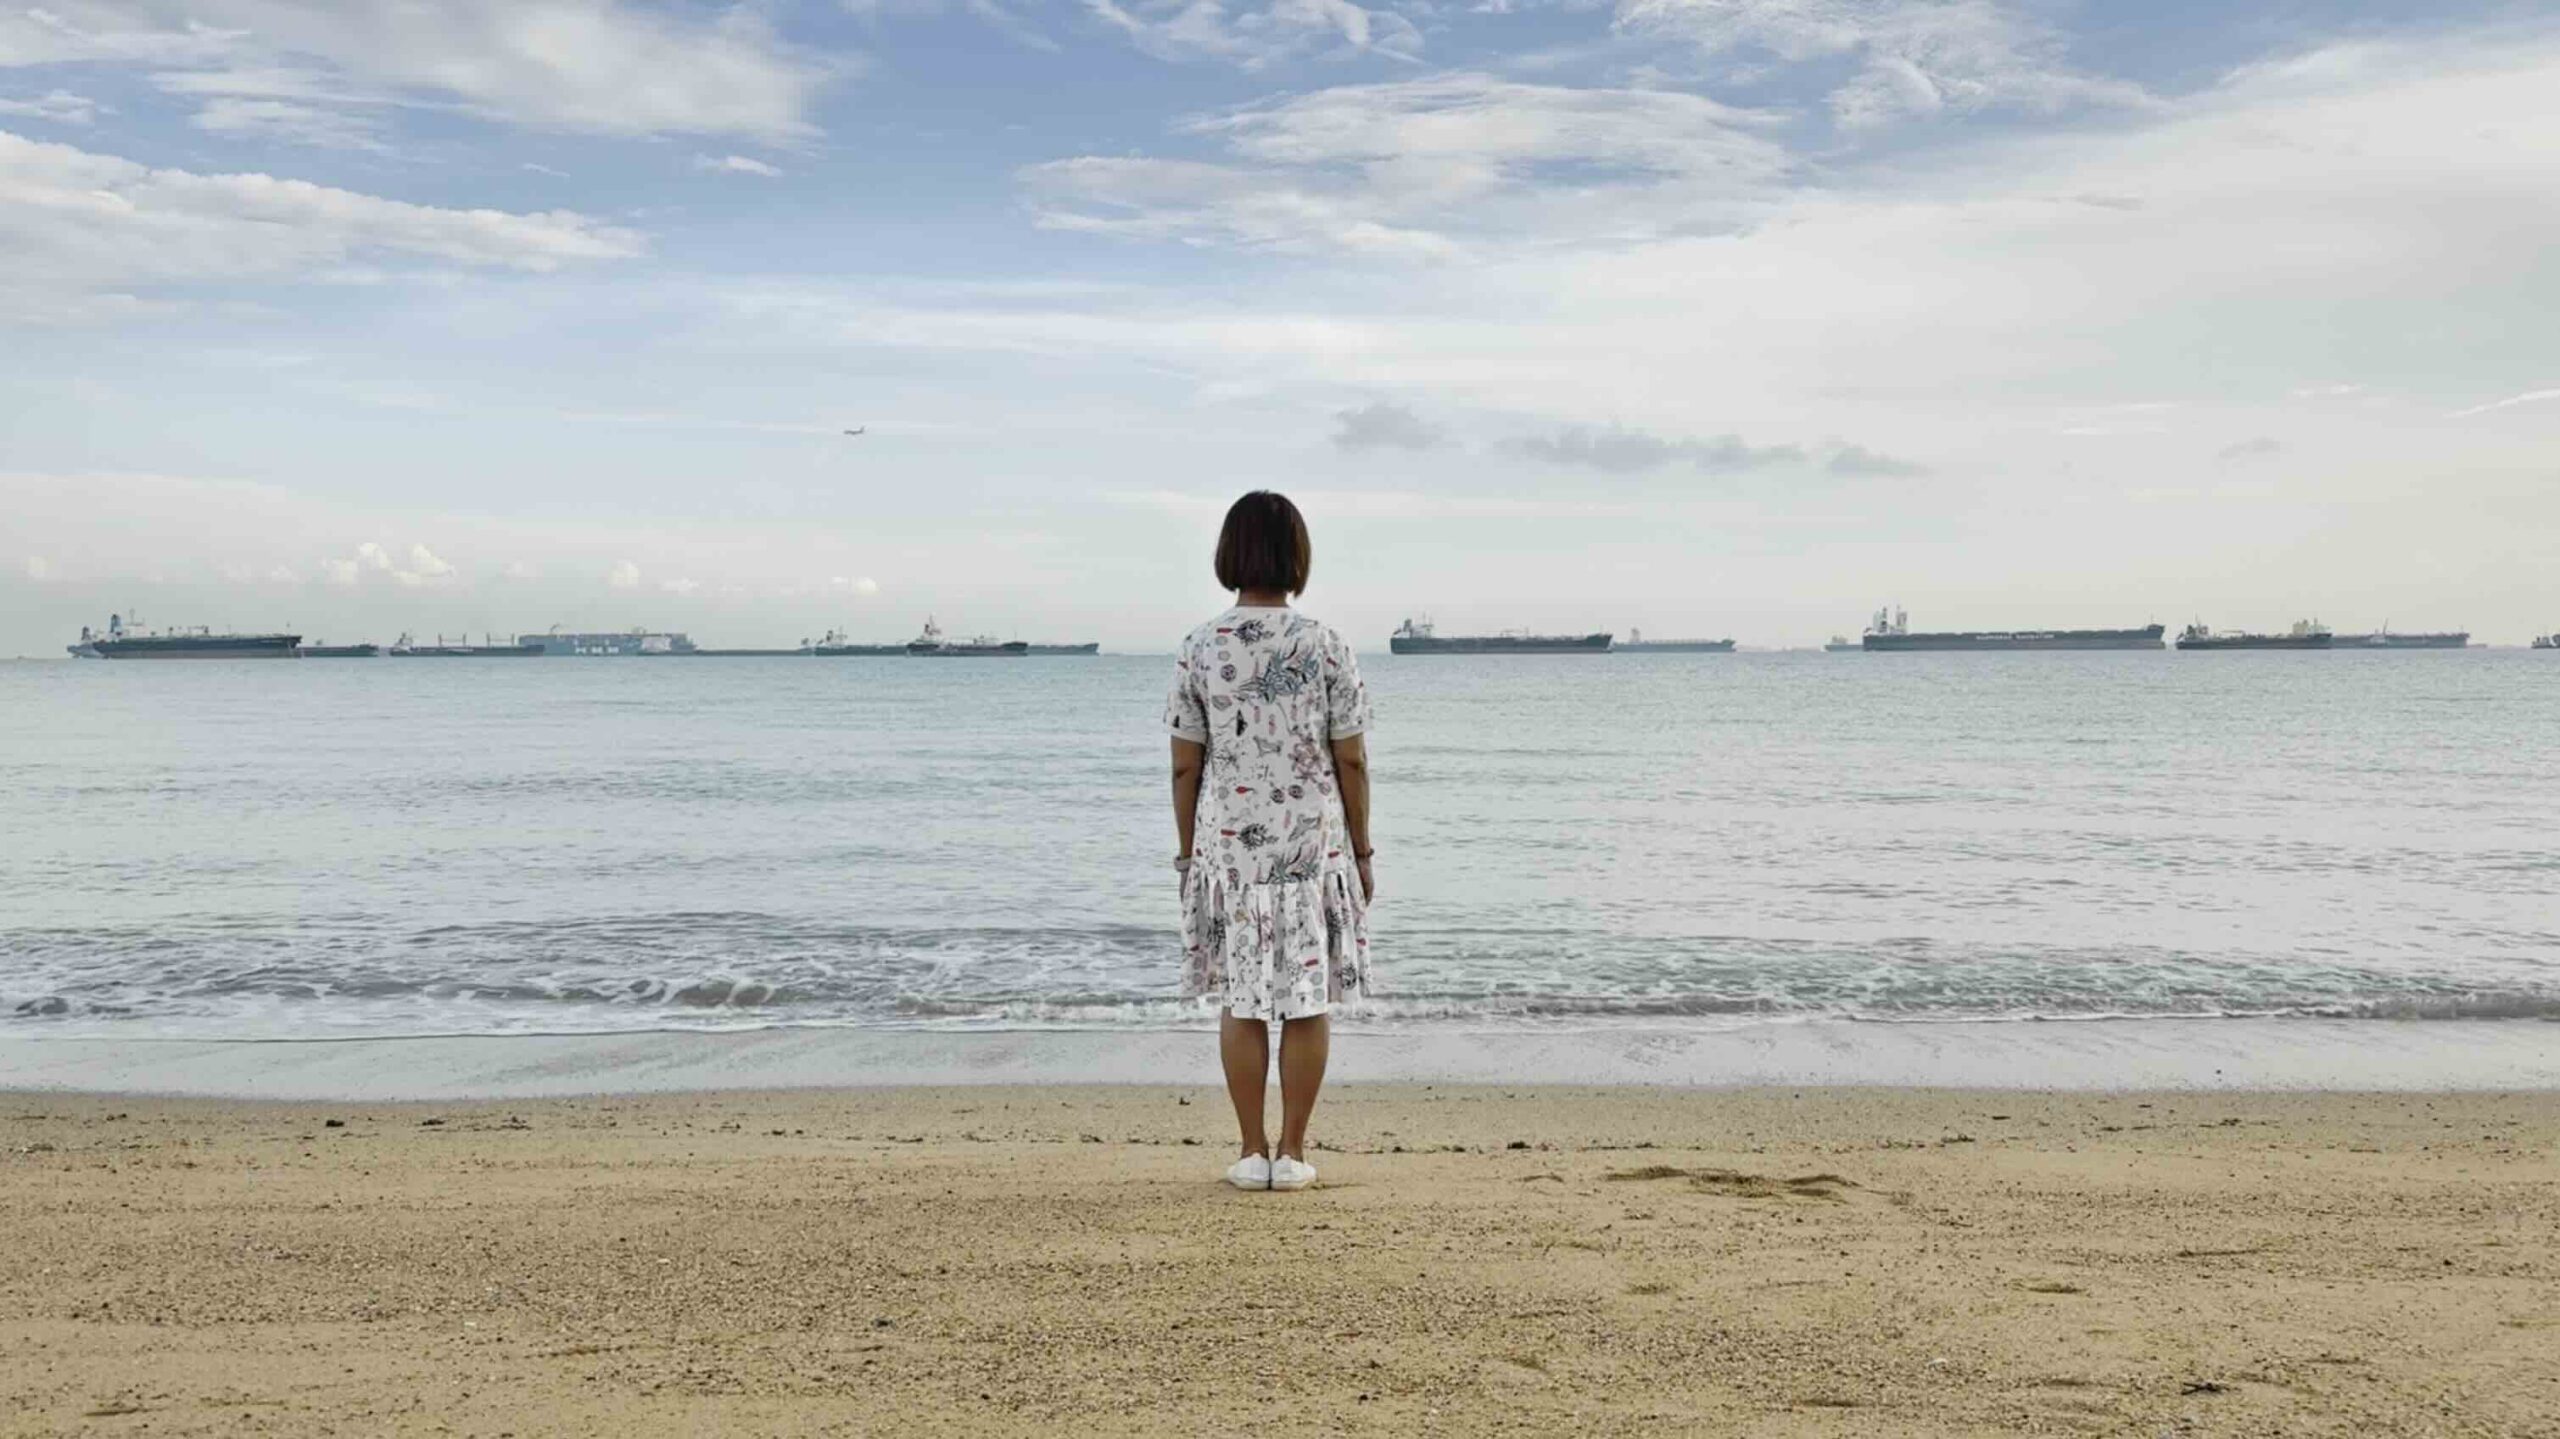 Michelle standing on the shore, facing the sea, reflecting on end-of-life matters.